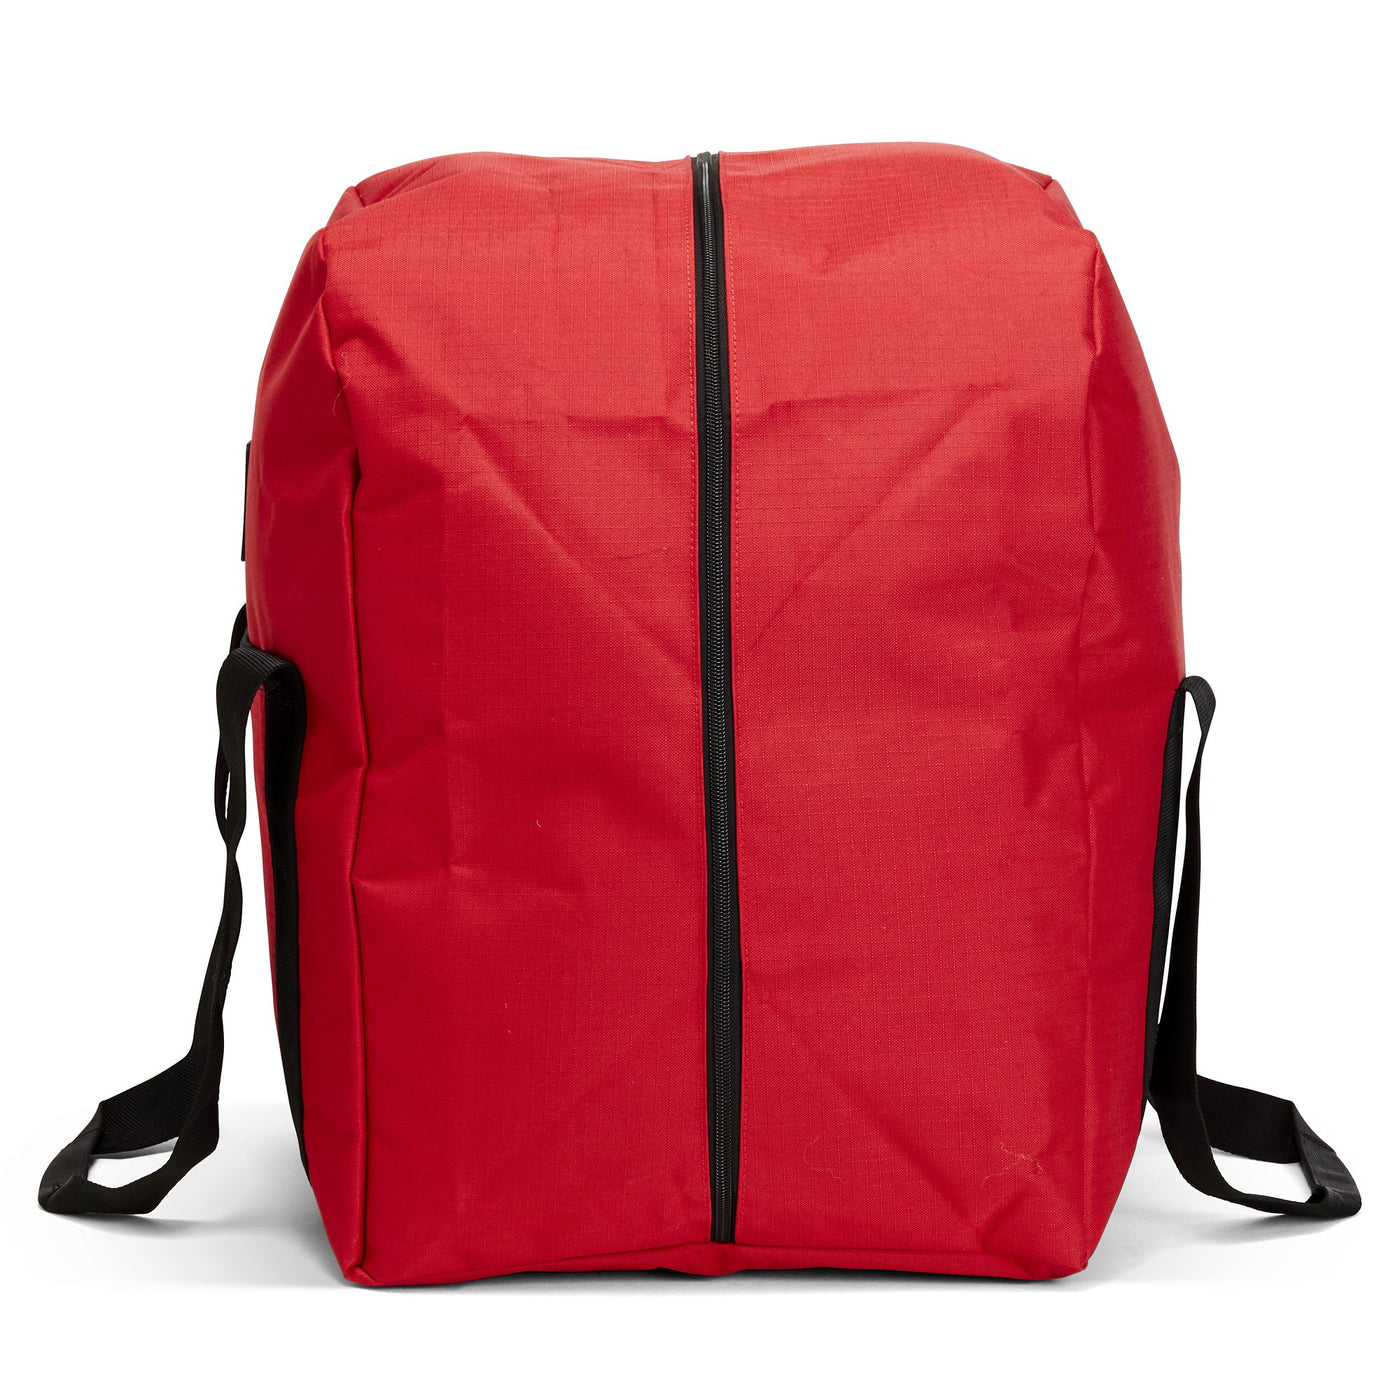 Step in Turnout Gear Bags LINE2design